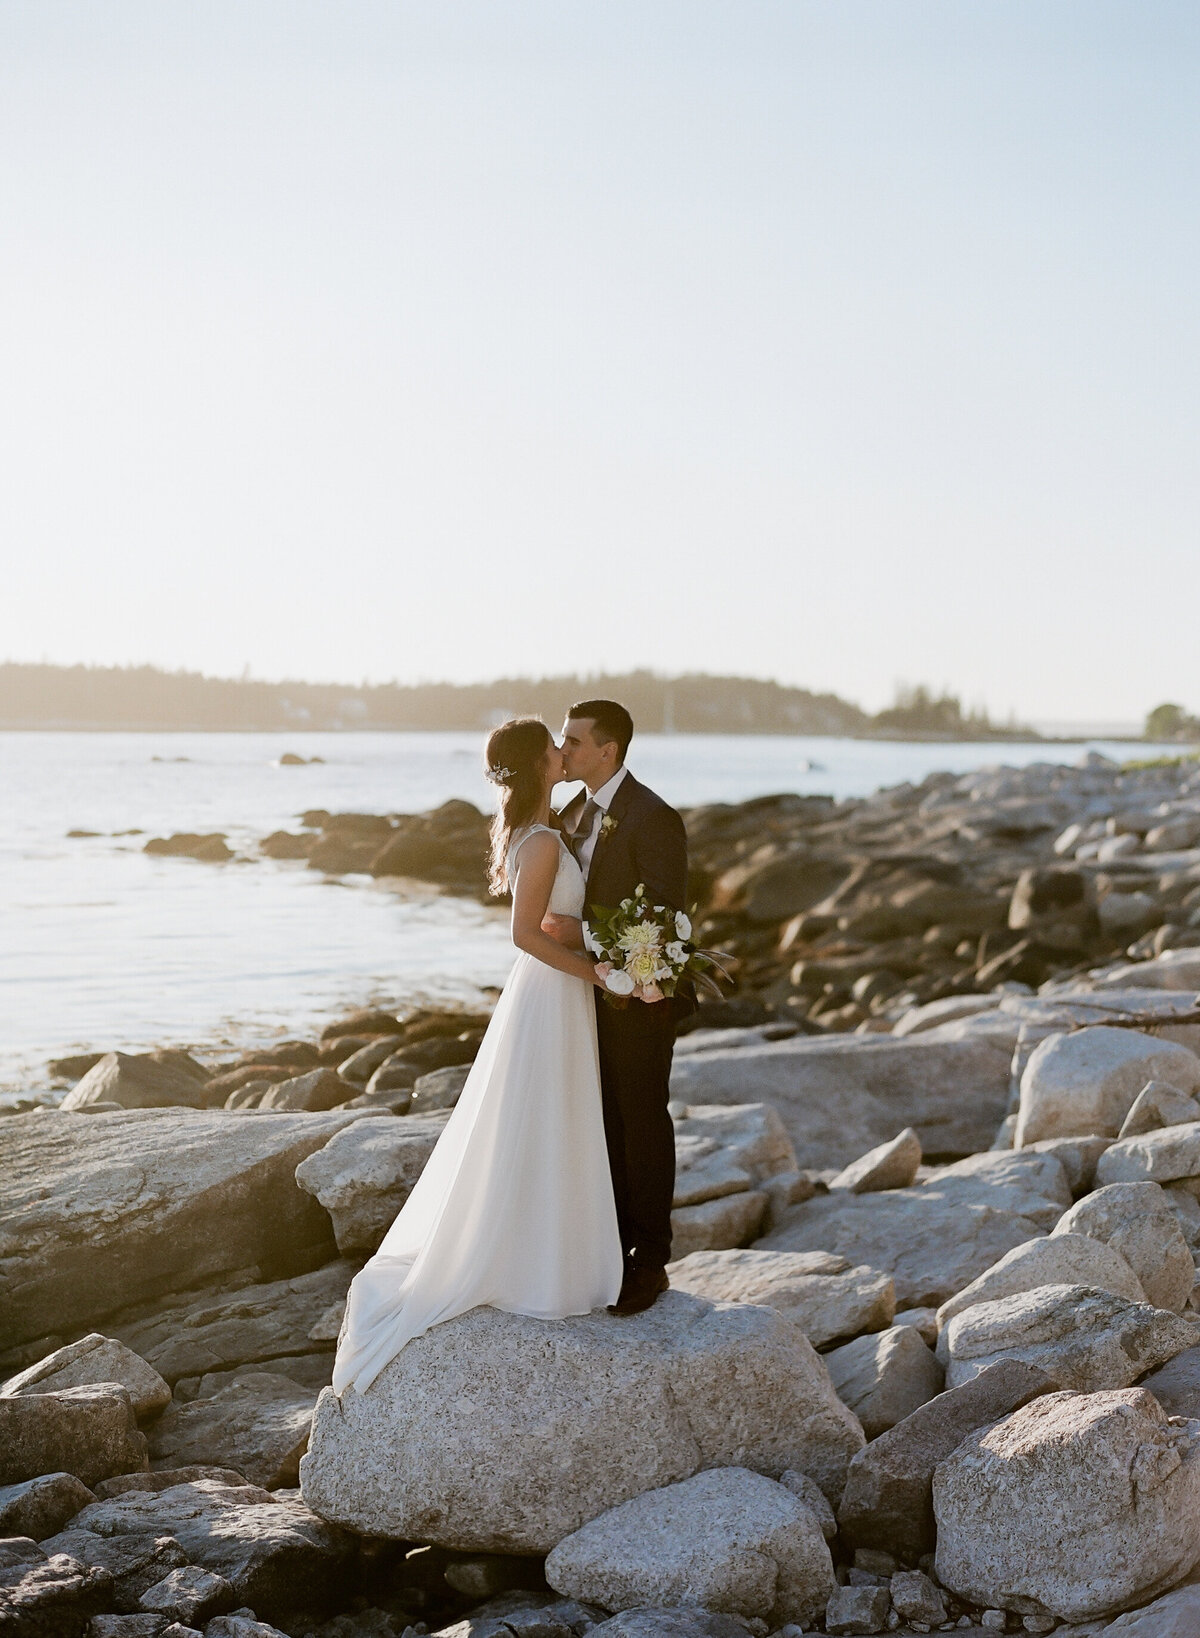 Jacqueline Anne Photography - Halifax Wedding Photographer - Jaclyn and Morgan-104